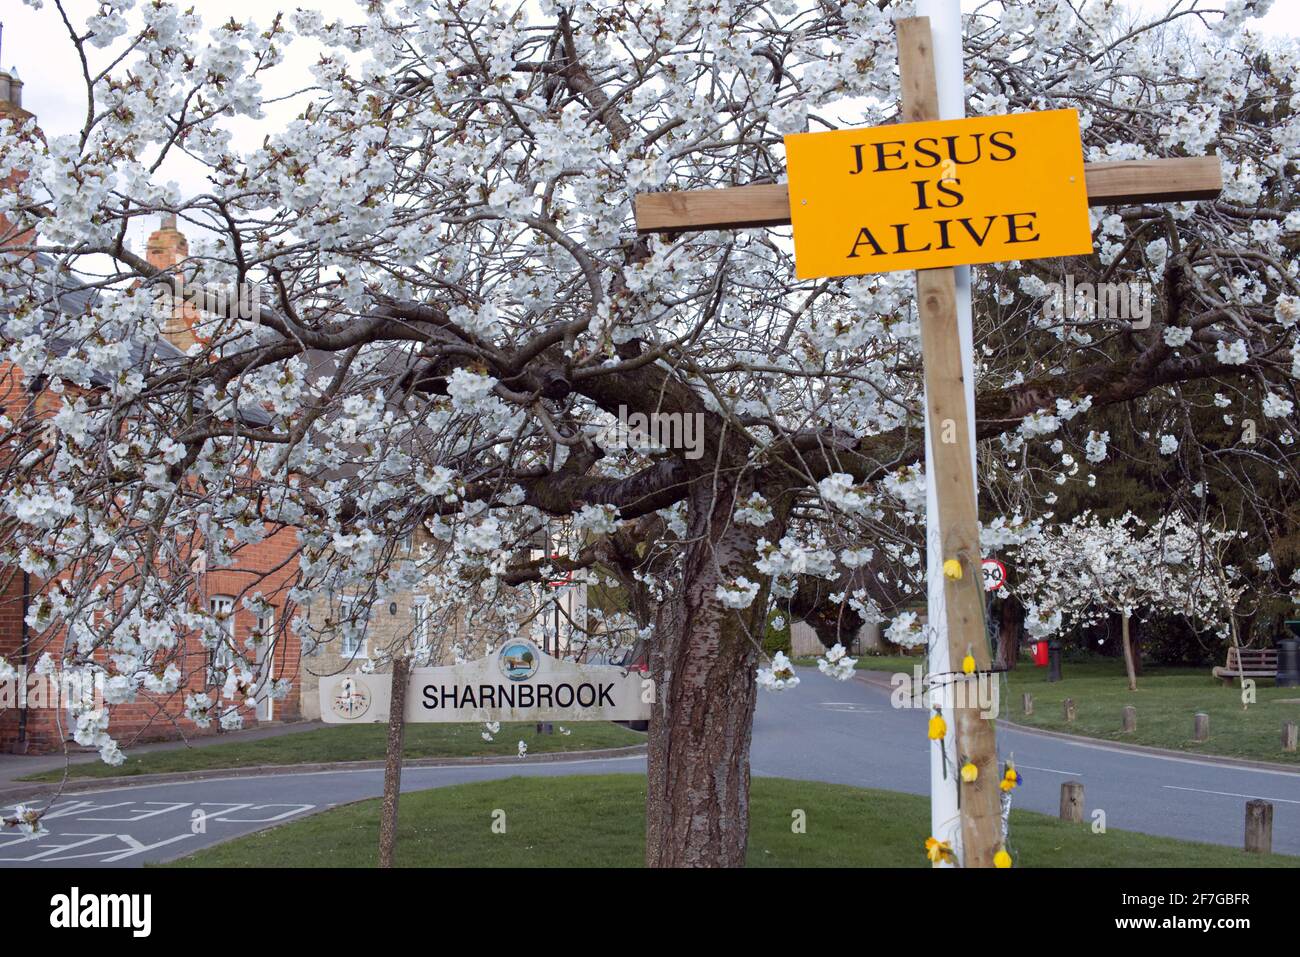 Sharnbrook, Bedfordshire, England, UK - Village green in springtime with cherry tree blossom and Jesus is Alive cross placed by evangelical church Stock Photo